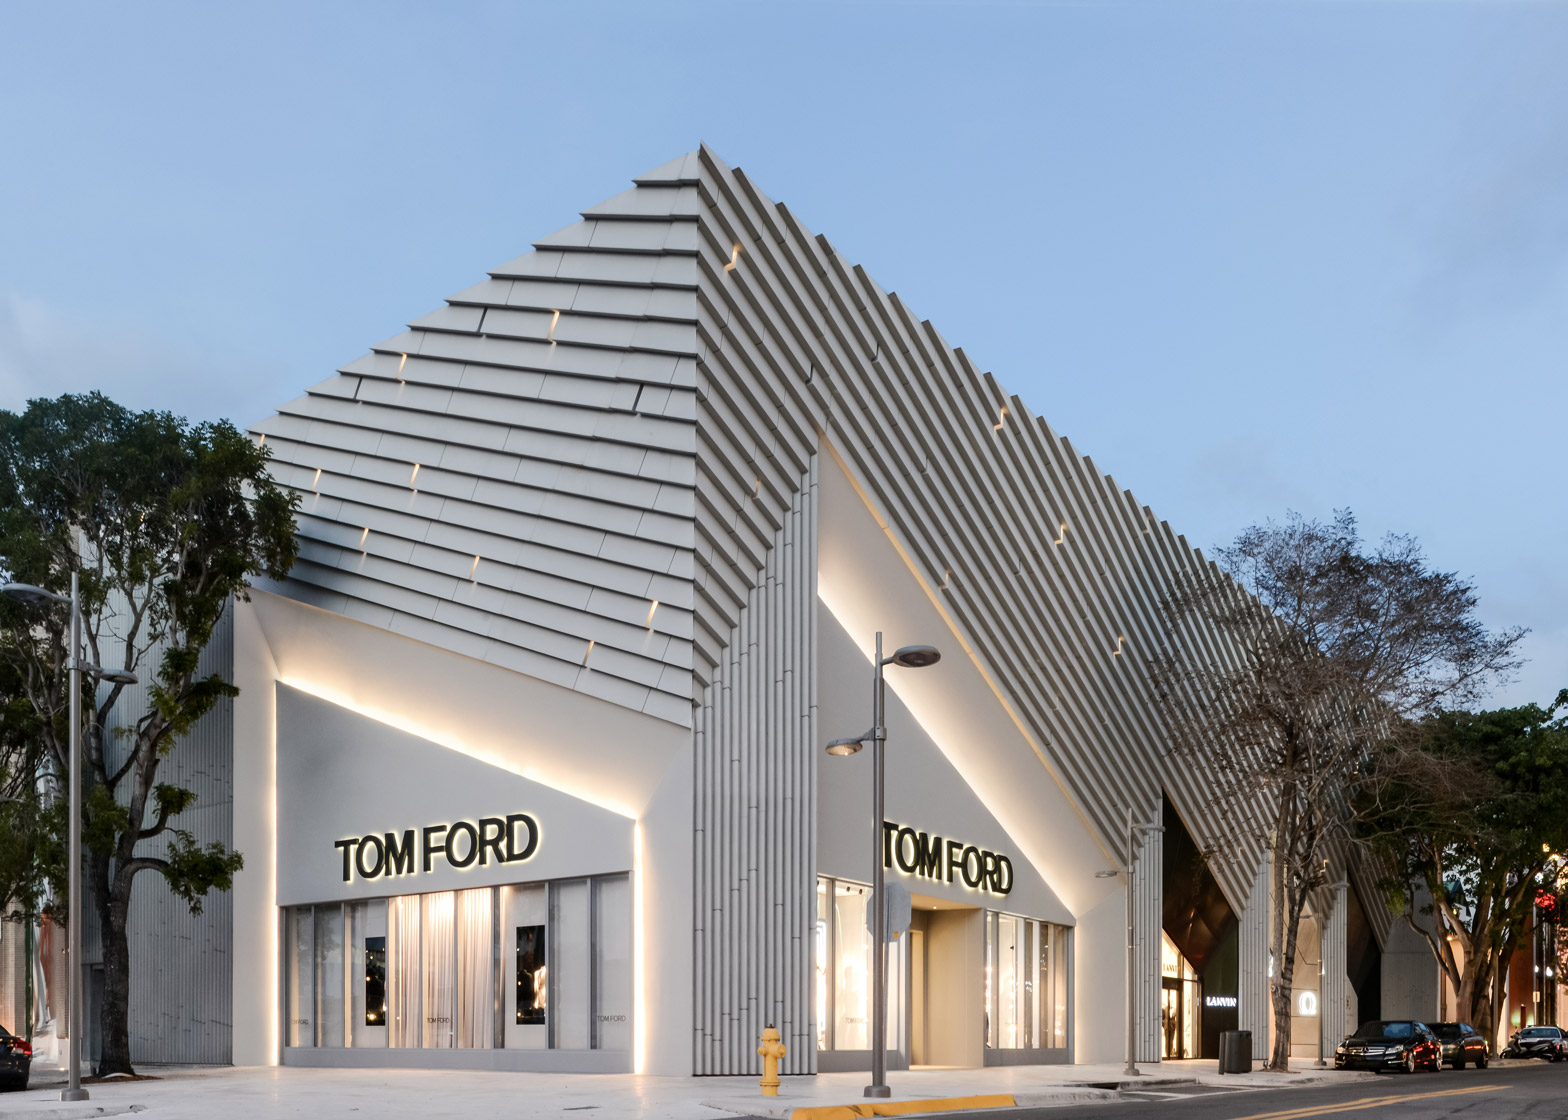 What's next for Miami's luxury shopping Design District? Gucci, an